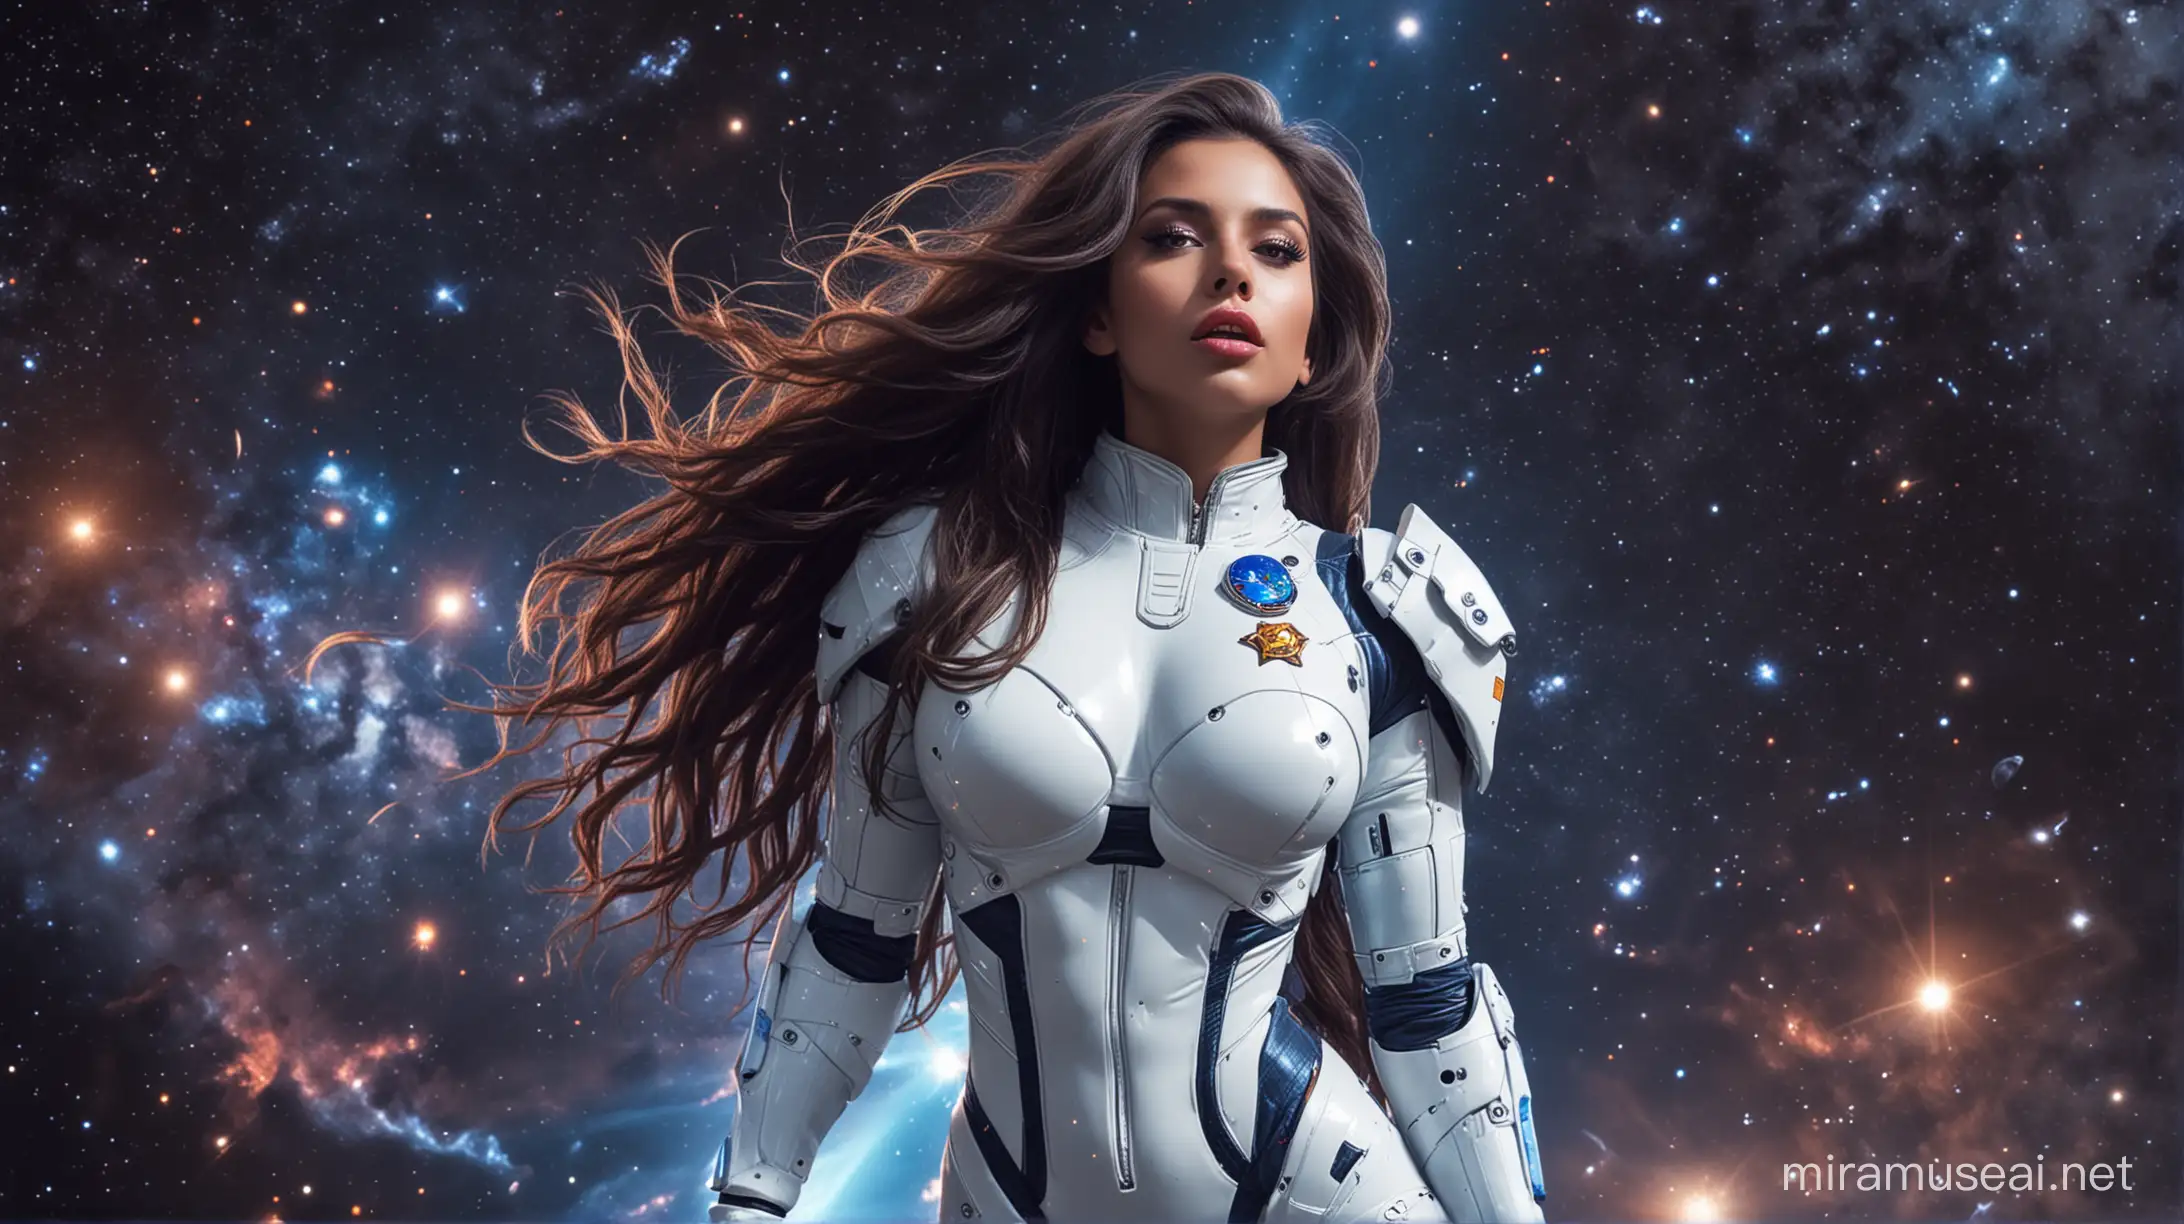 sexy latin girl, slim, long hair, wild hair, sexy makeup, bright lips, fat lips, full body, big tits, large boobs, tight spacesuit, armored spacesuit, white and blue spacesuit, bright glowing spacesuit, open space, burning planets, galaxies